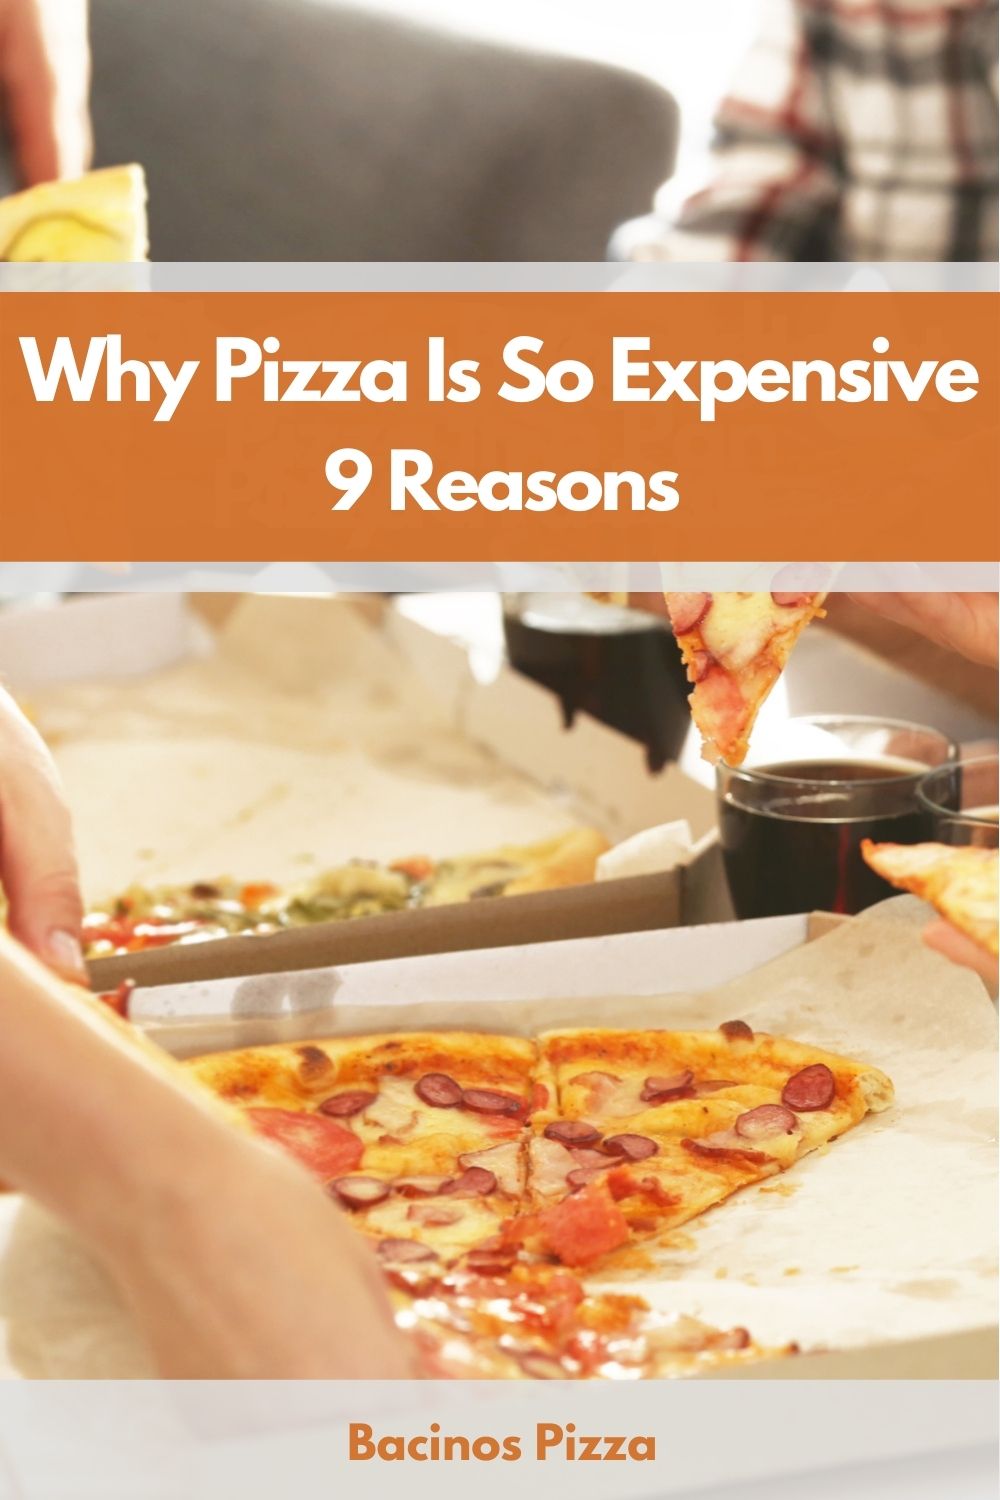 9 Reasons Why Pizza Is So Expensive